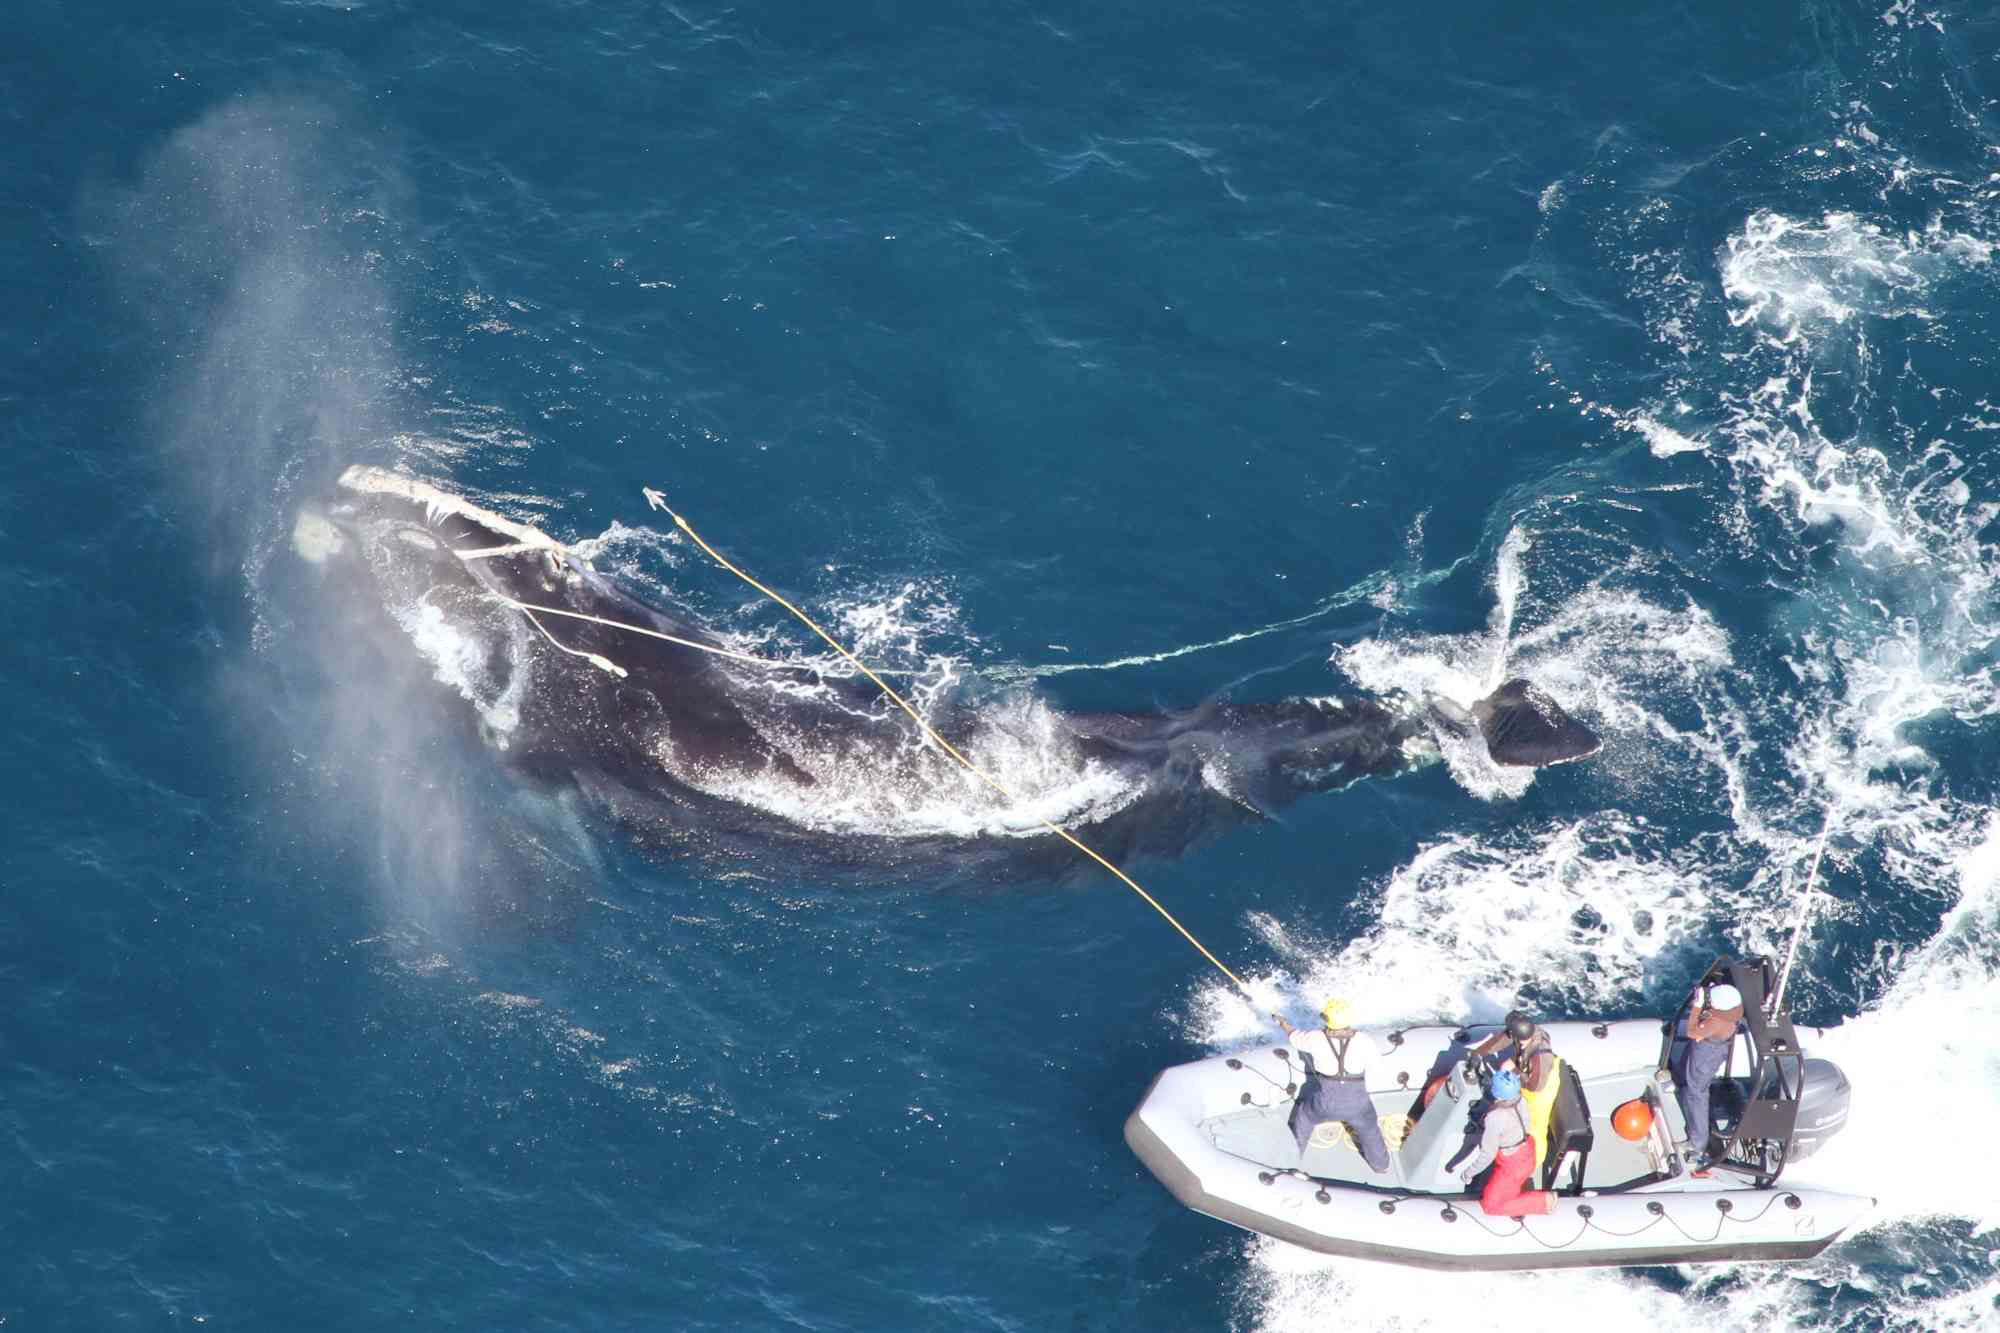 Entangled North Atlantic Right Whale